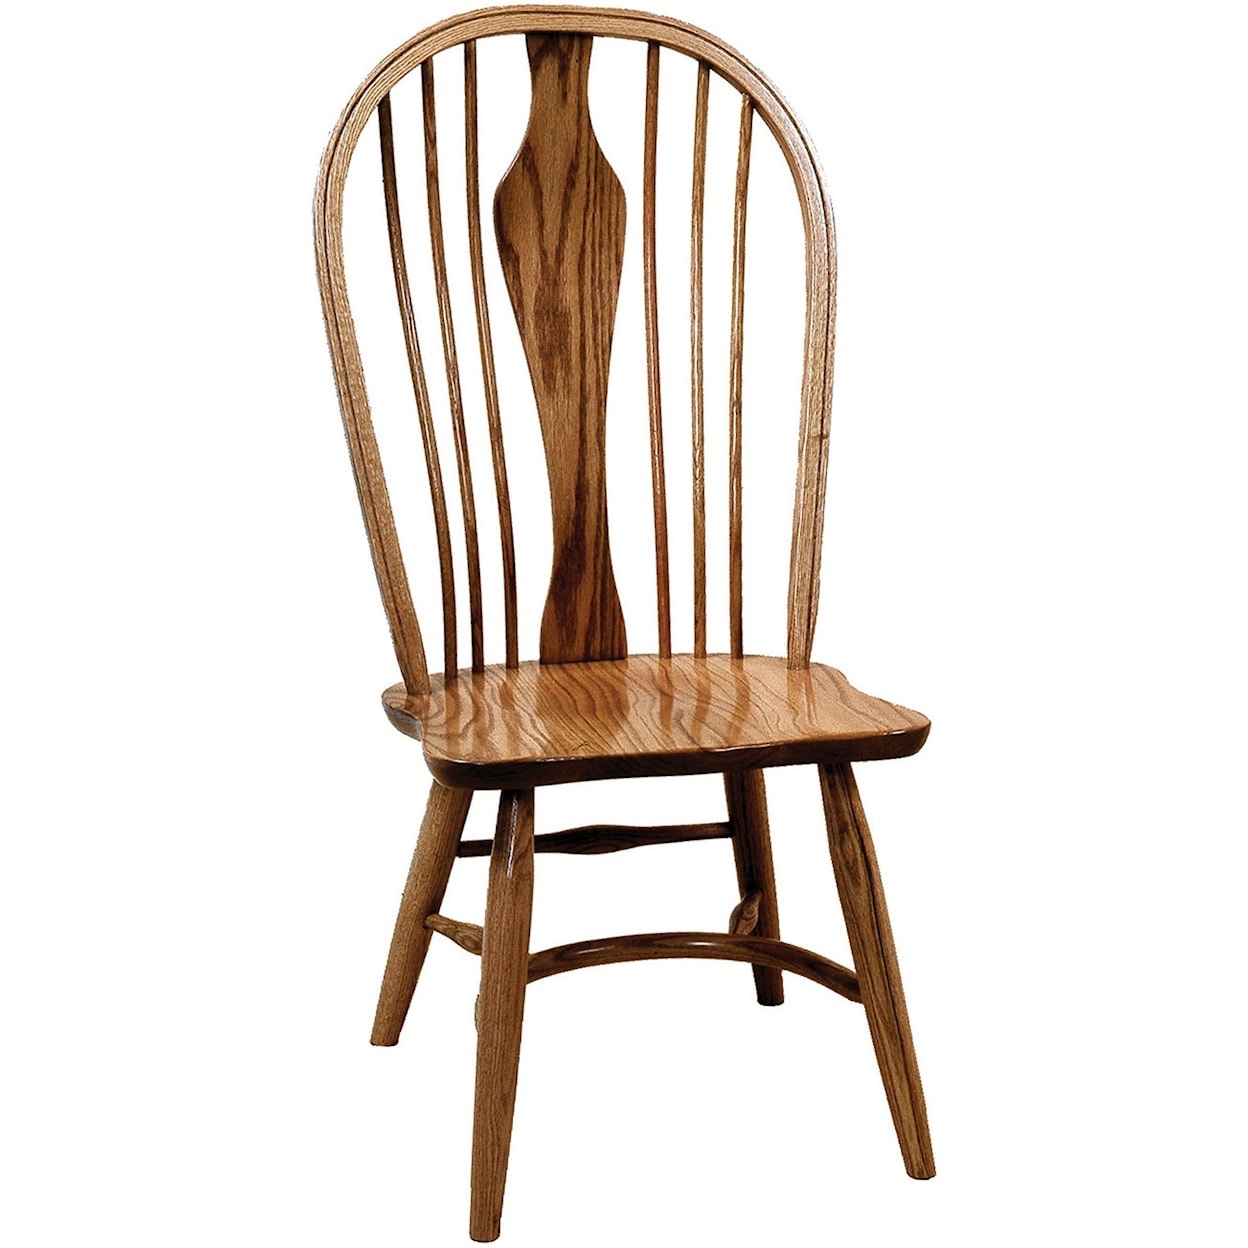 Wengerd Wood Products Bellaire Side Chair